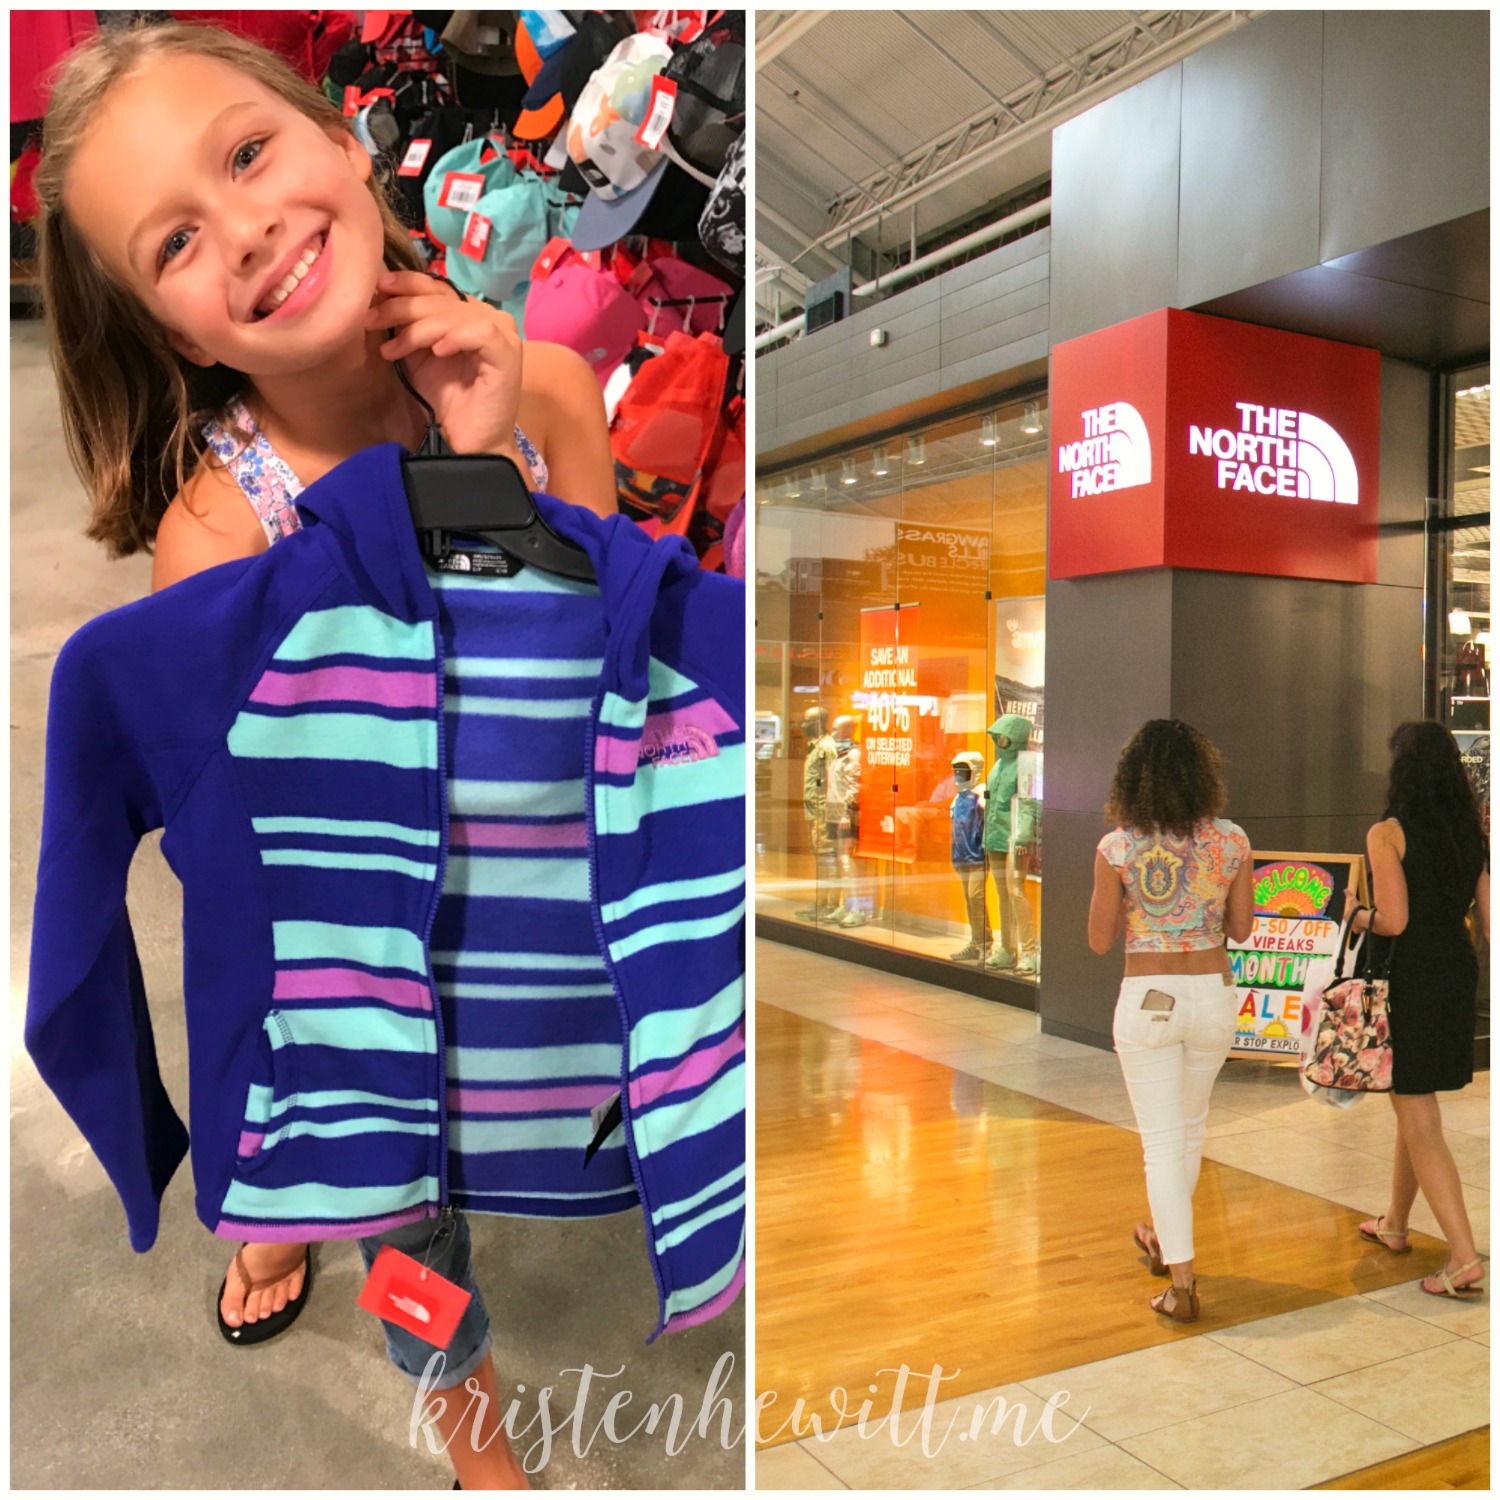 It's almost time for school and shopping for tweens can be tough! So here's a guide to back to school shopping for tweens written by a tween. Good luck!